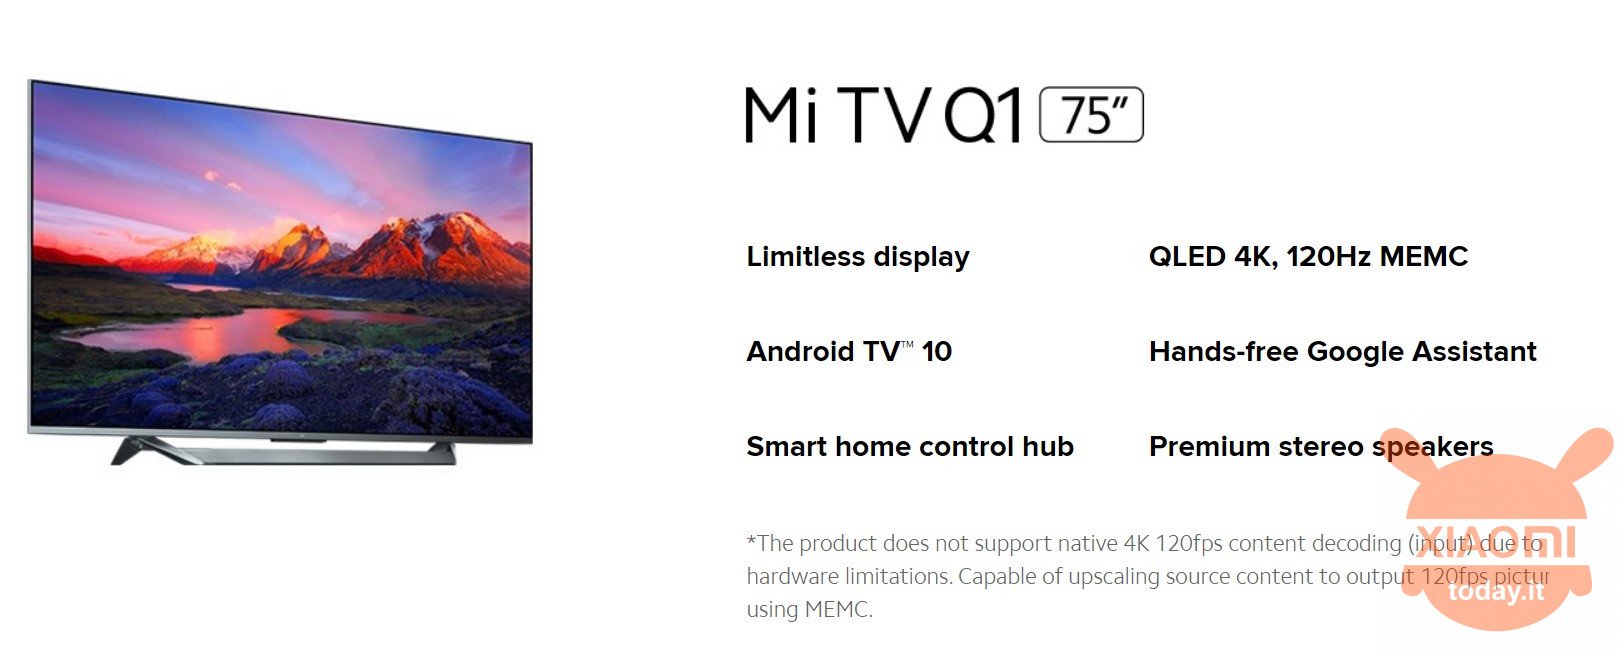 xiaomi mi tv q1 75 "does not natively support 4k with 120Hz